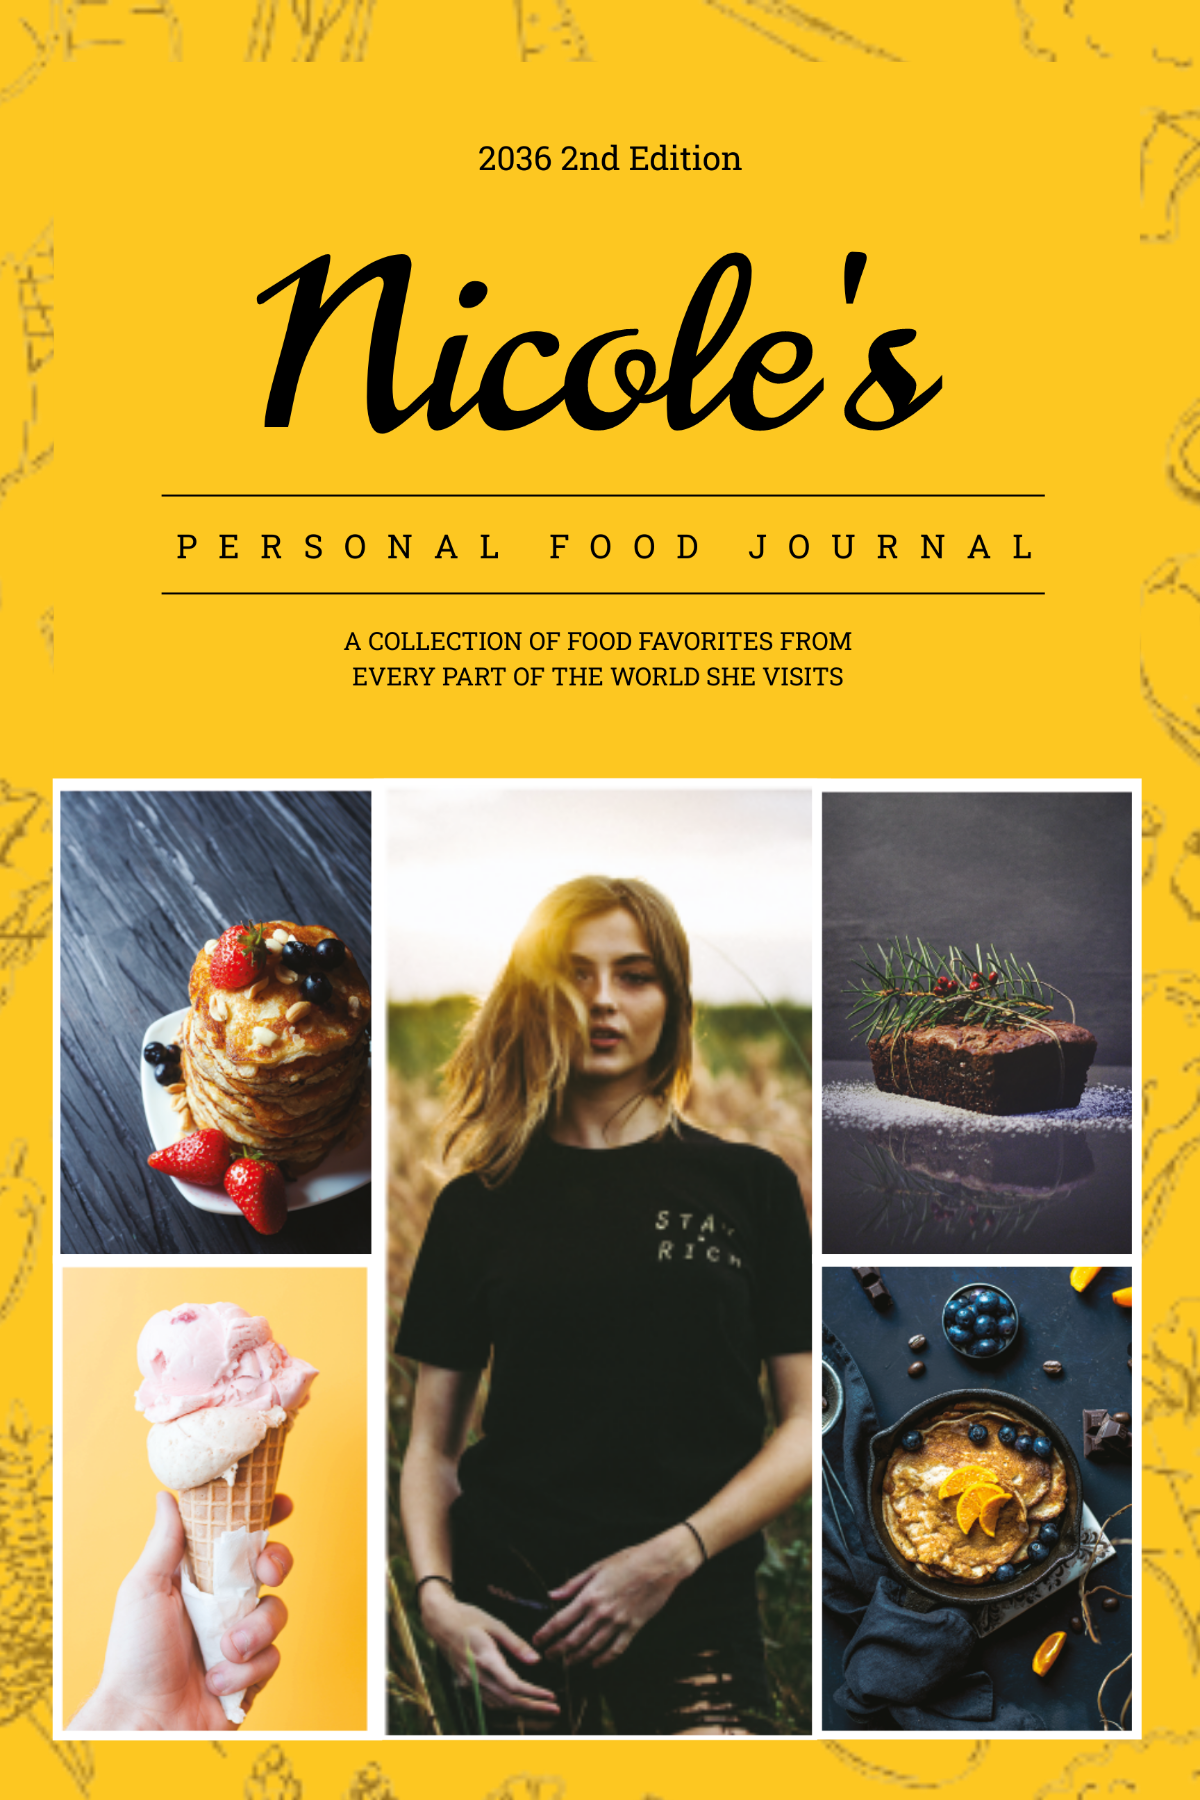 Food Journal Book Cover Template